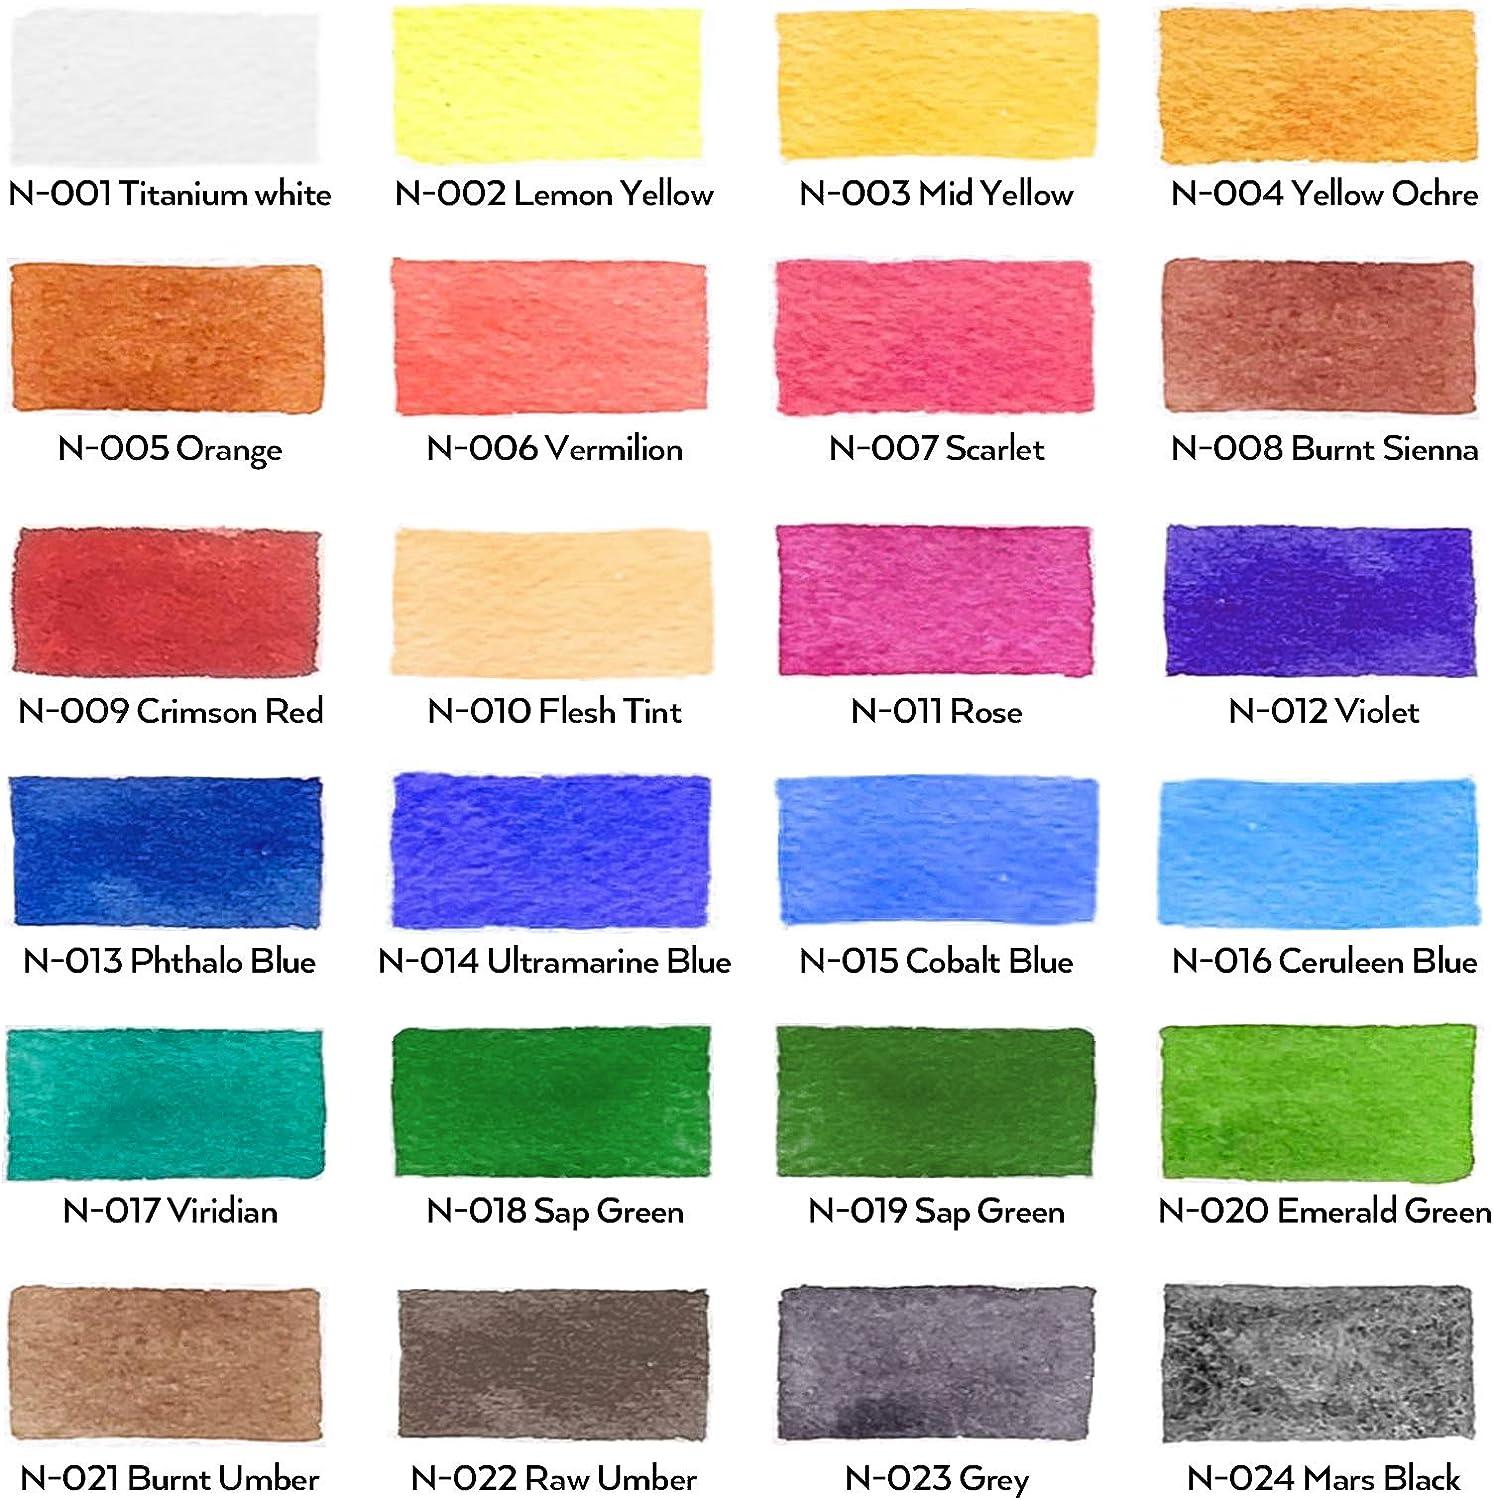 Nicpro 32 Colors Outdoor Acrylic Paint Bulk with Brush and Sponge